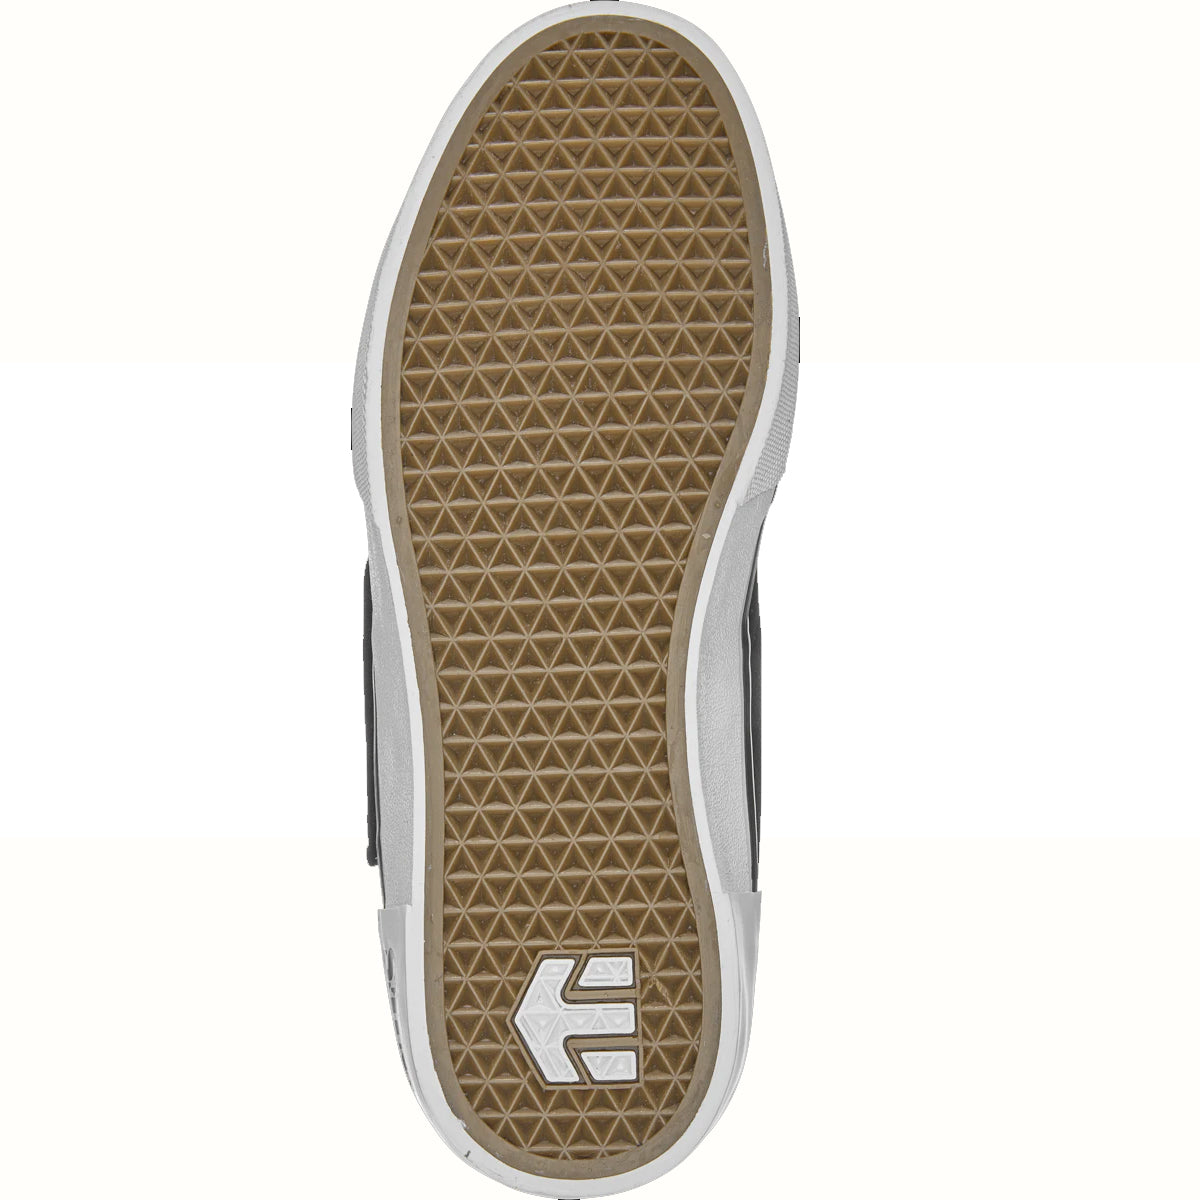 Etnies Andy Anderson Pro Model Black White Skate Shoes